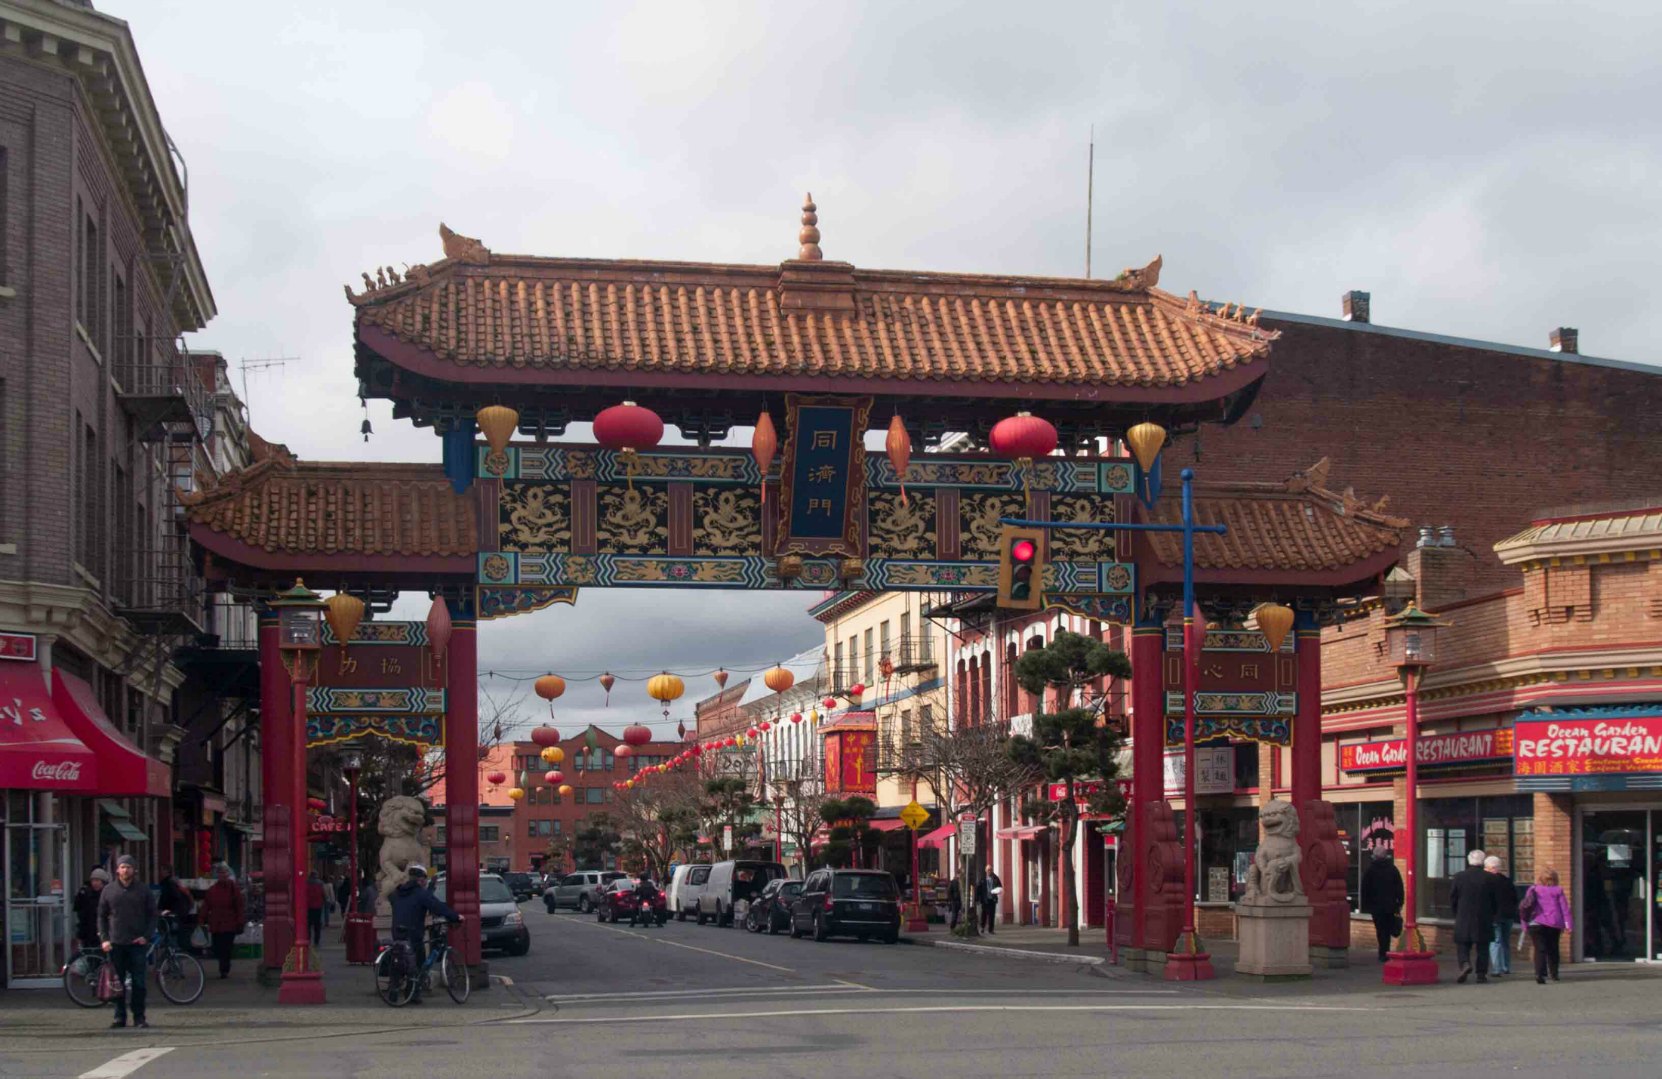 Gate of harmonious Interest, built in 1980-1981 (photo by Victoria Online Sightseeing Tours)